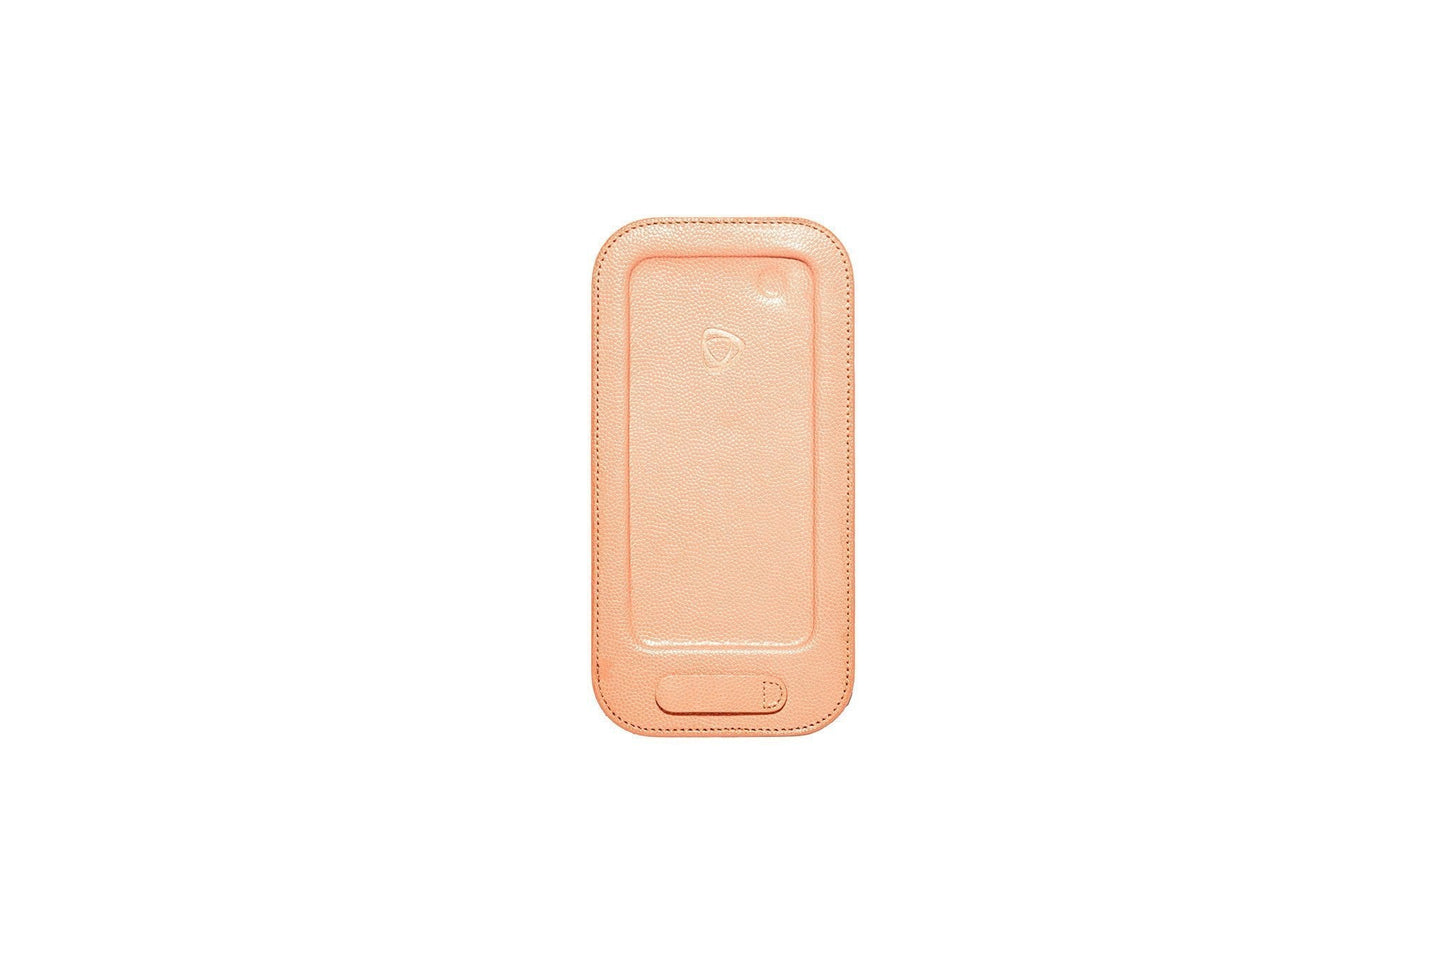 Artisanal Bags Light Salmon Leather iPhone Case - Multiple Colors A778680